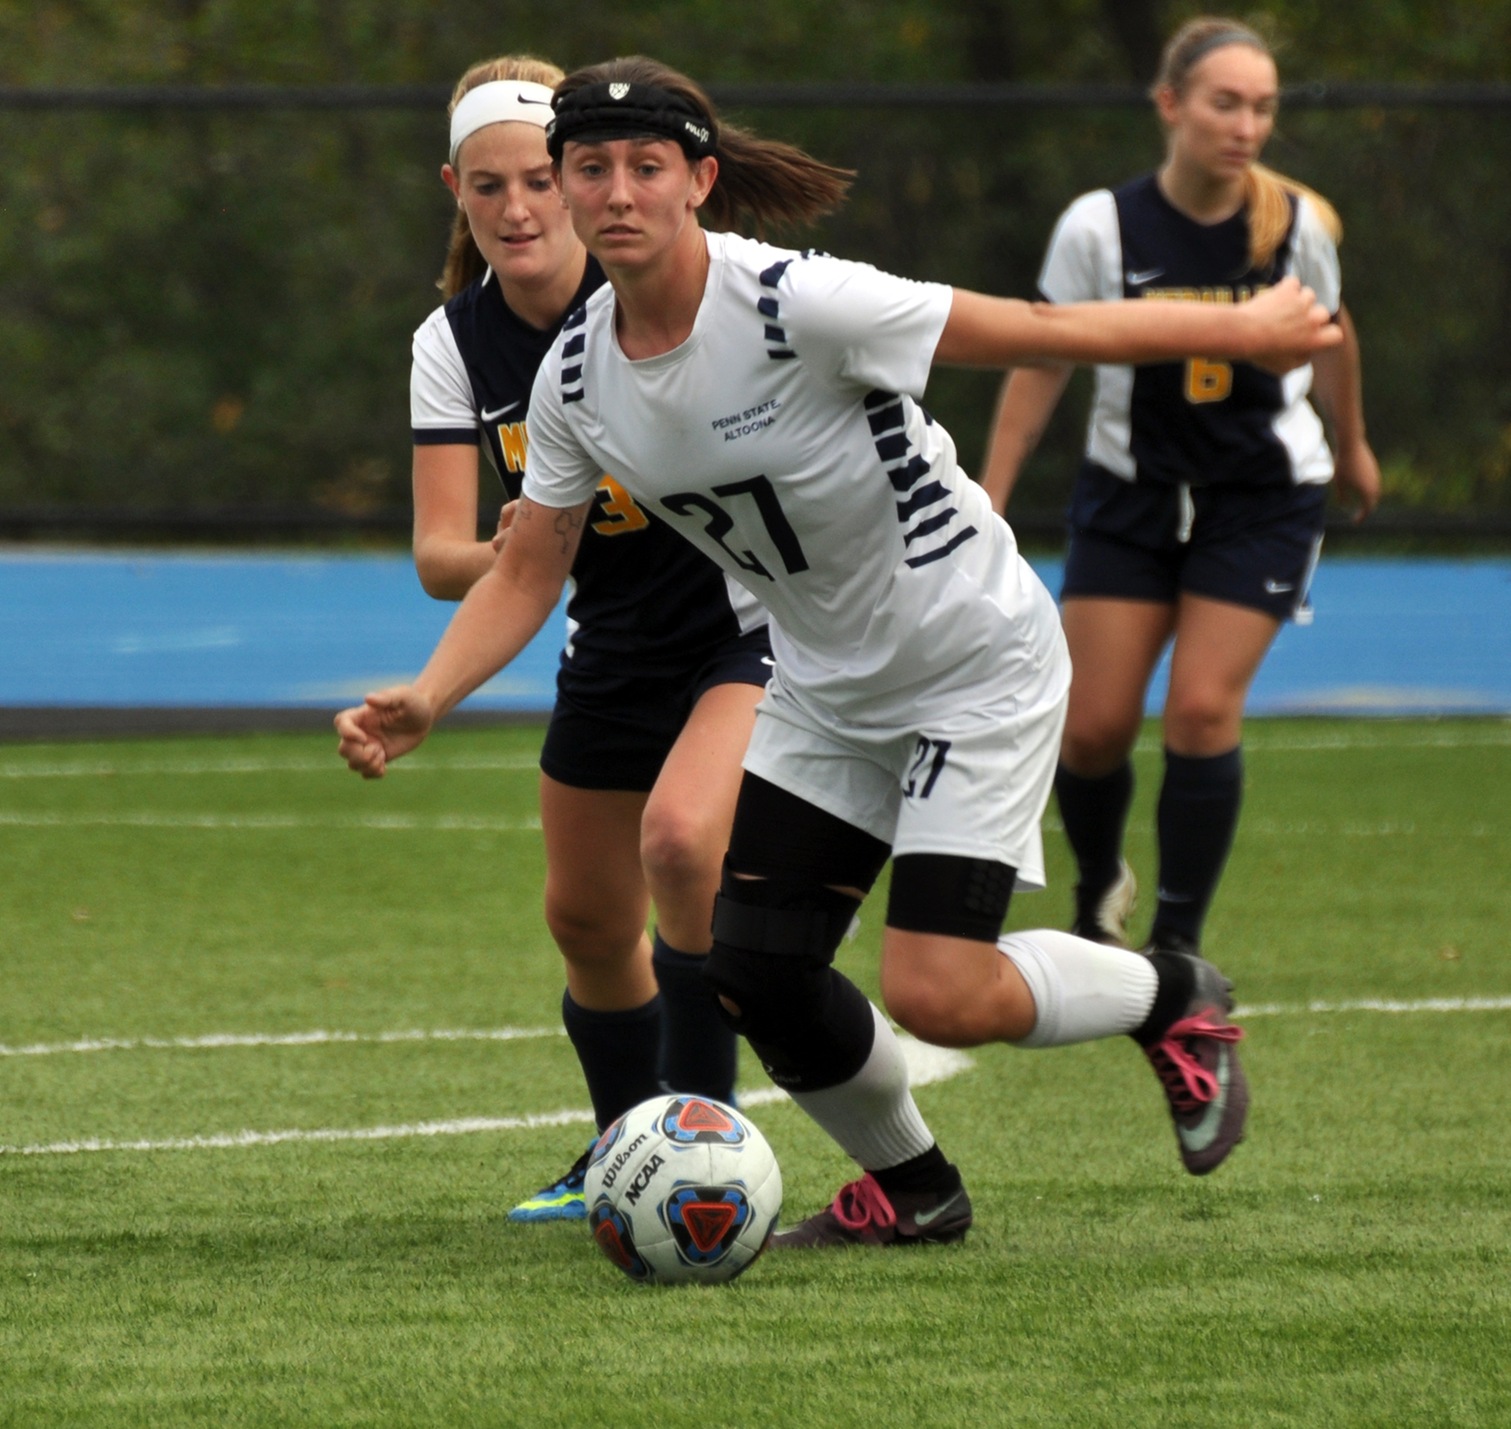 Photo: Penn State Altoona freshman Kierra Irwin led all players in Tuesday night's game with four shots on goal.